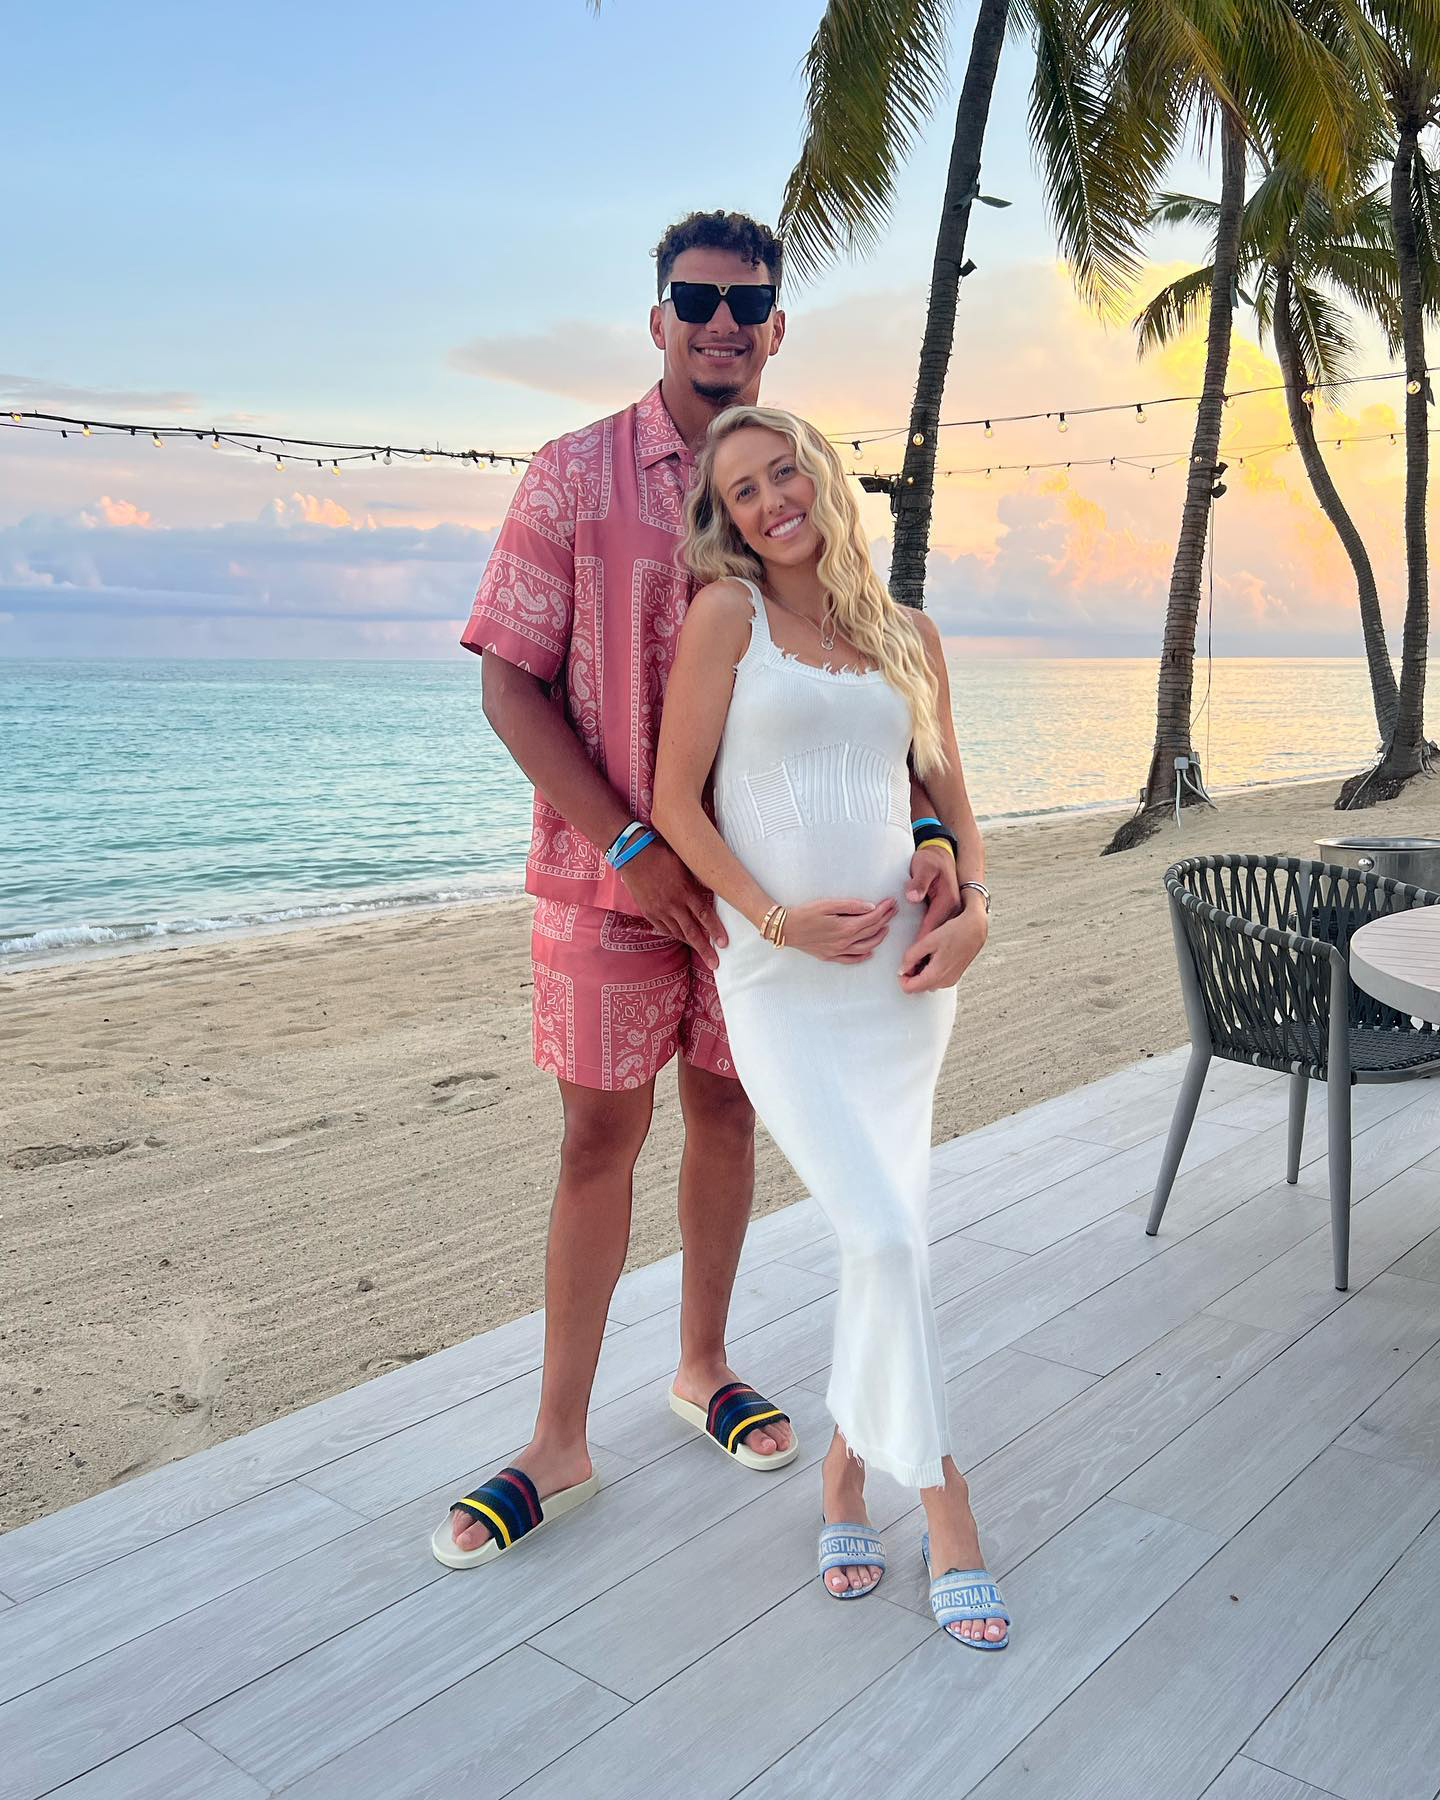 Patrick and Brittany Mahomes reveal family's unconventional naming